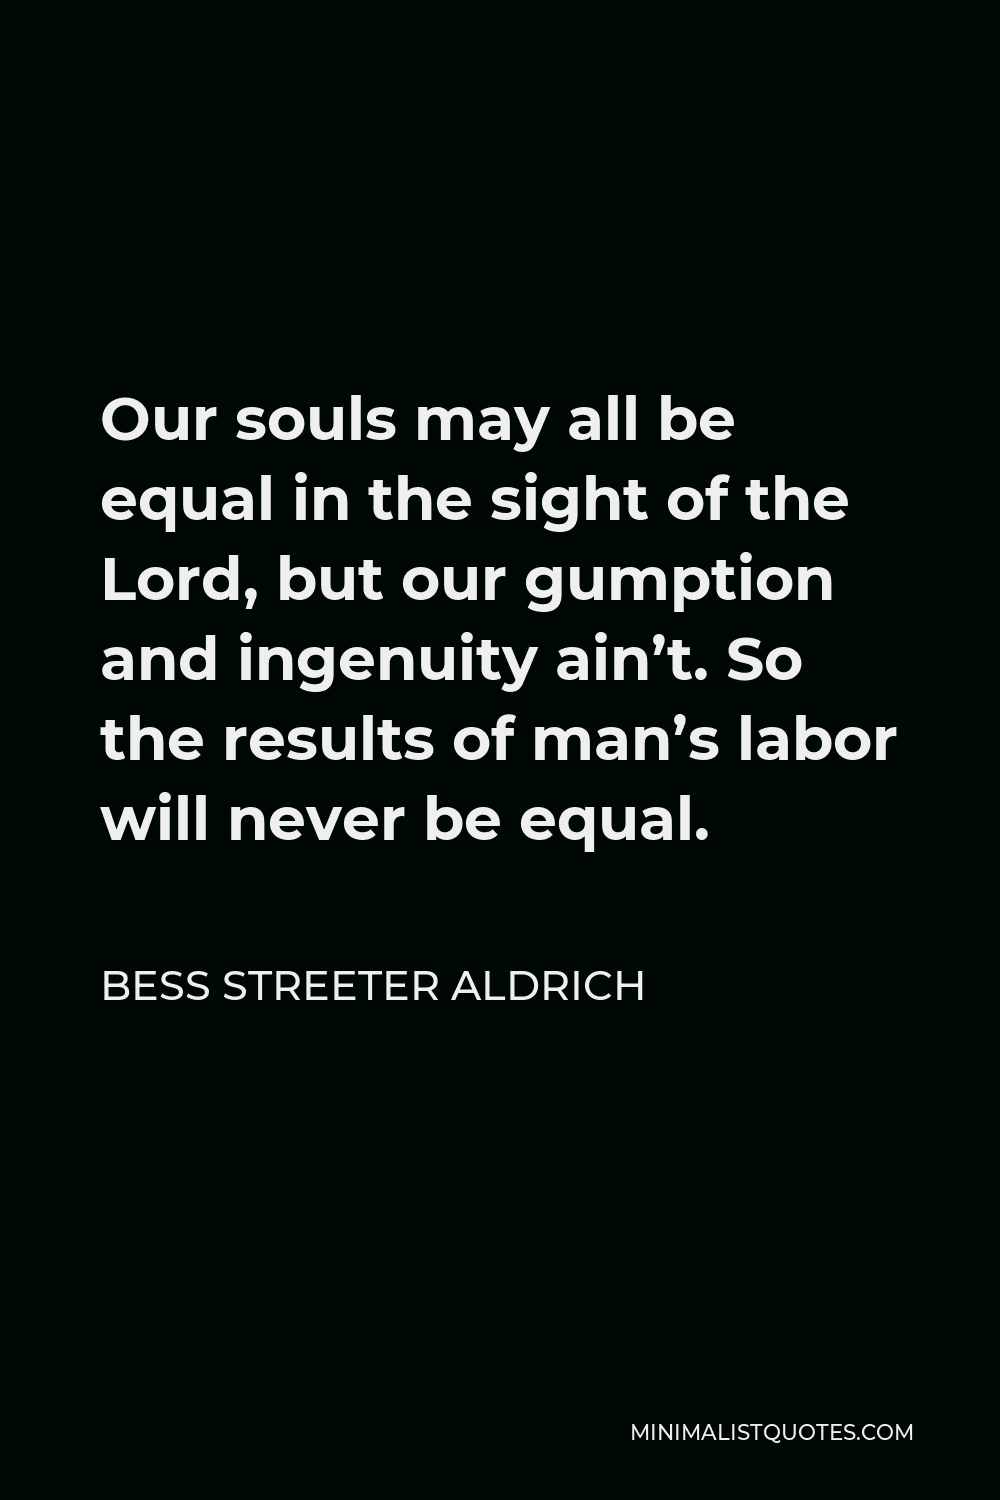 Bess Streeter Aldrich Quote - Our souls may all be equal in the sight of the Lord, but our gumption and ingenuity ain’t. So the results of man’s labor will never be equal.